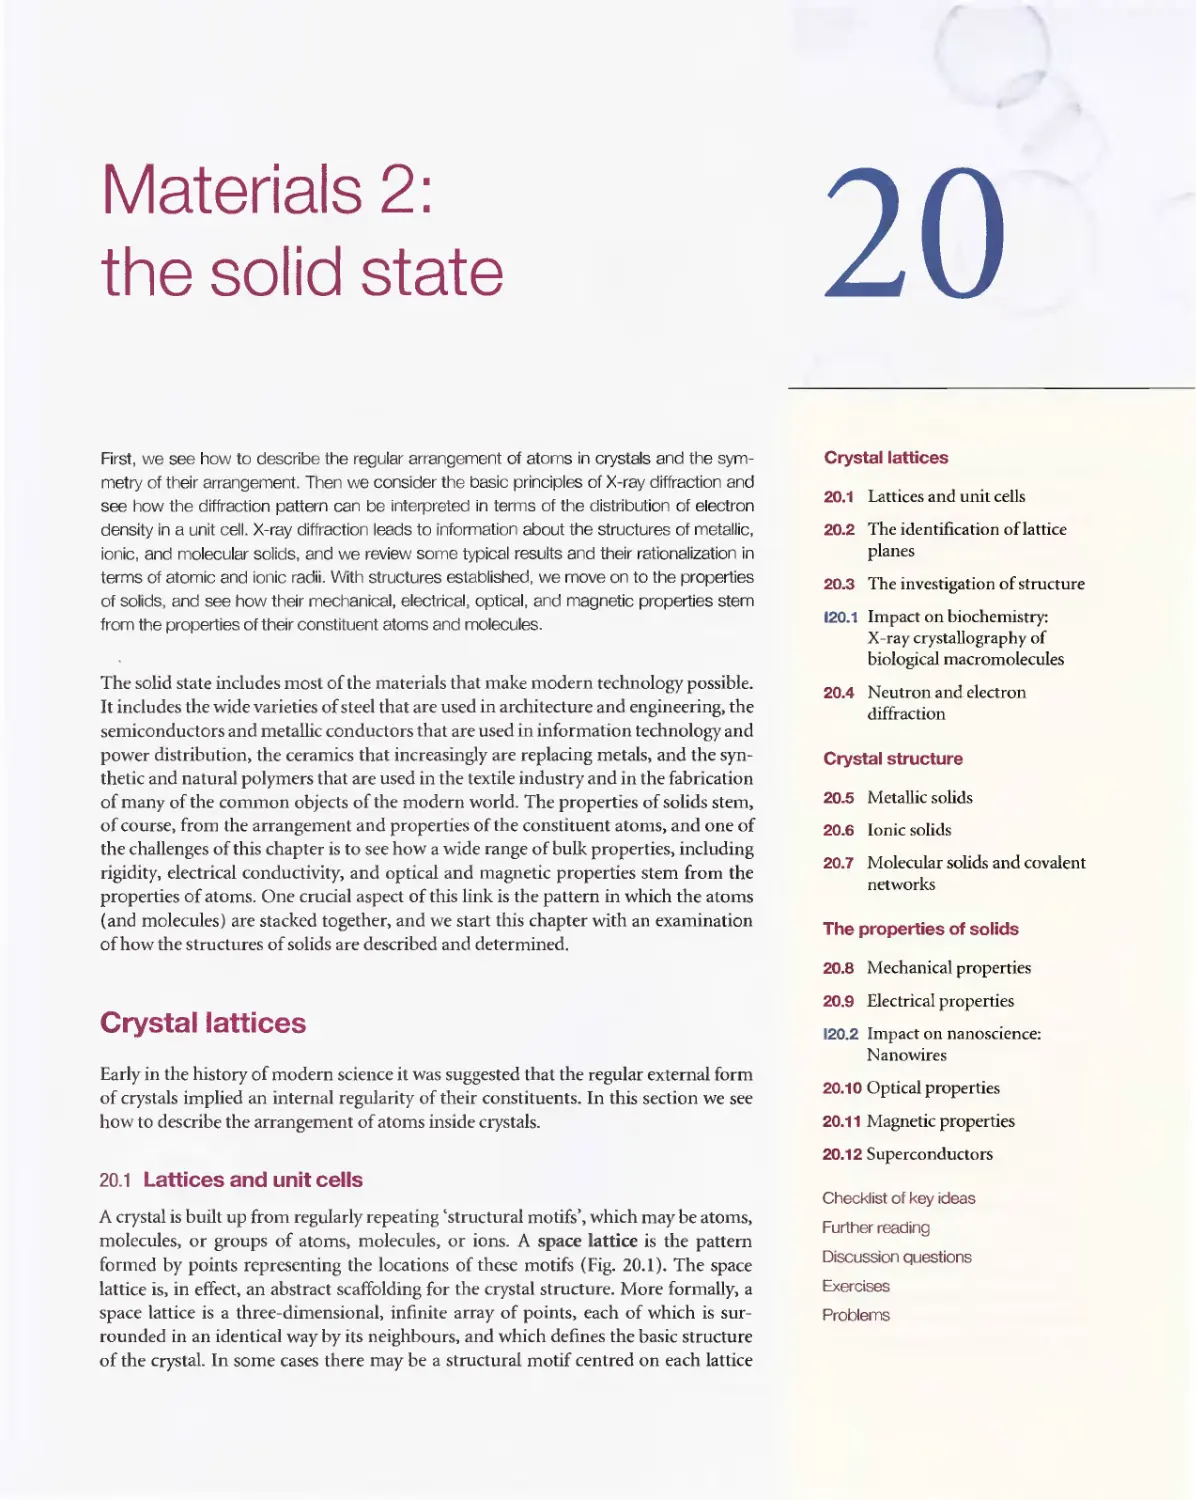 20 - Materials 2 - The solid state